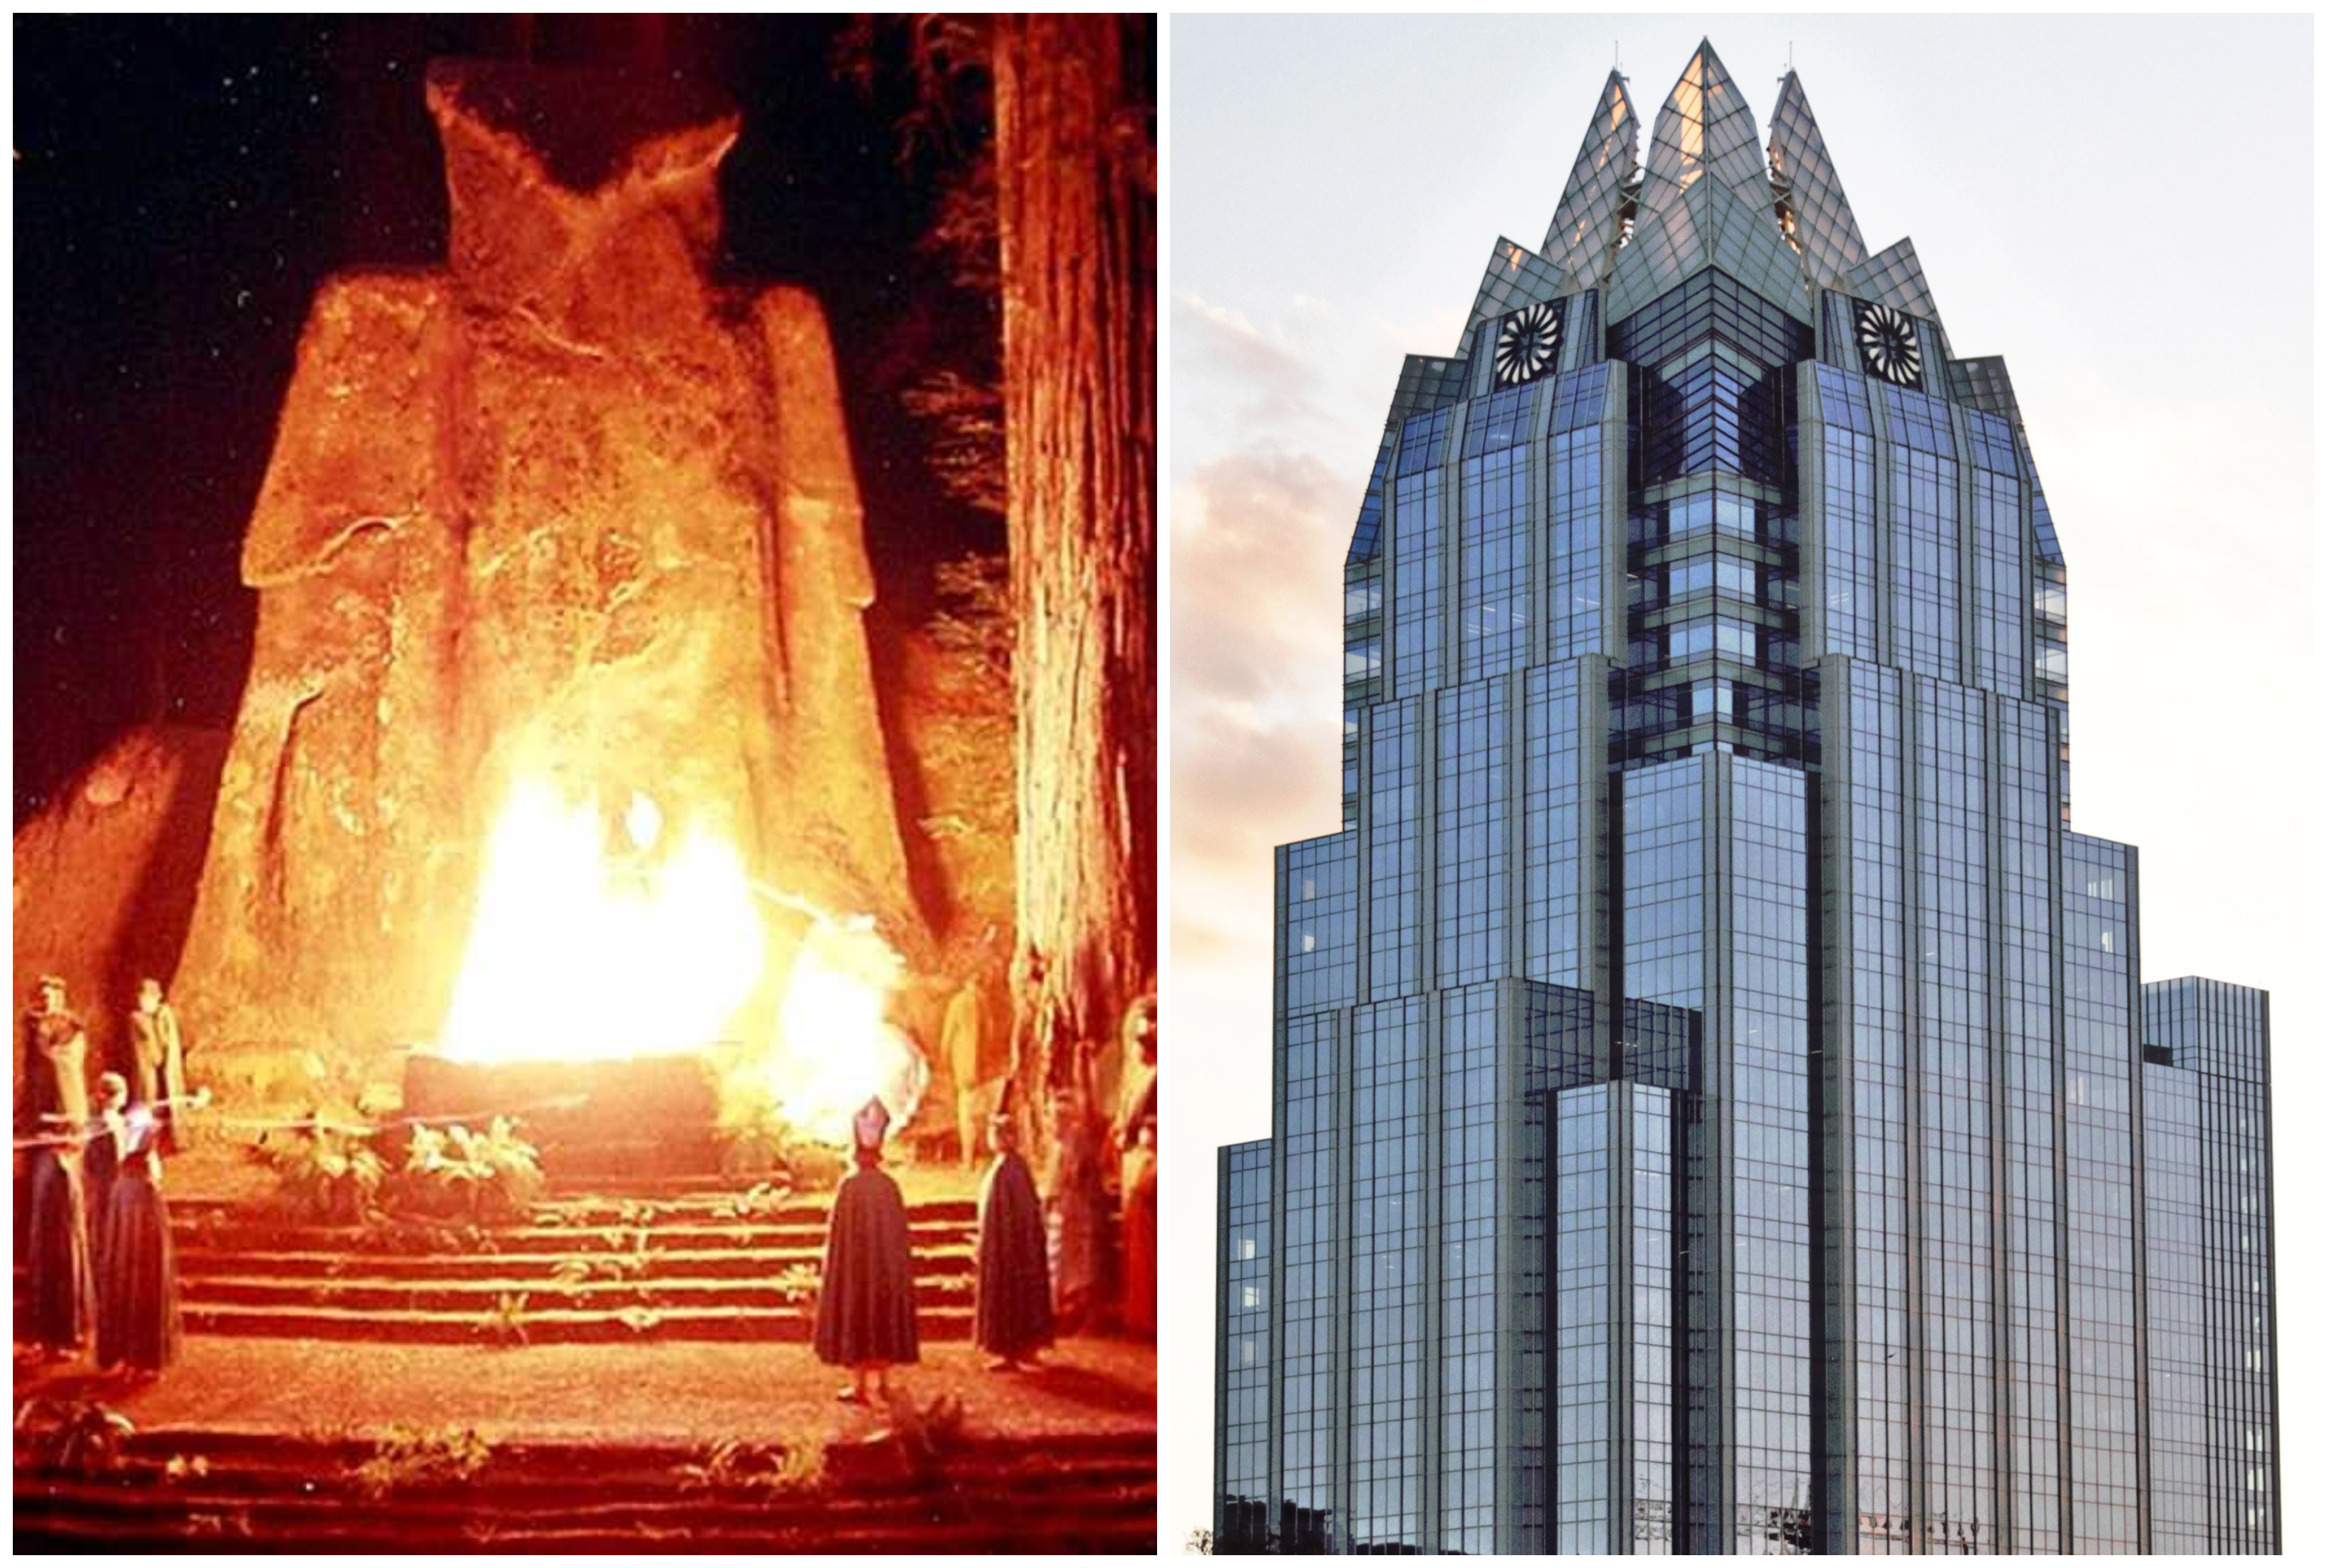 On the left, the owl statue at the Bohemian Grove camp Alex Jones alleges i...